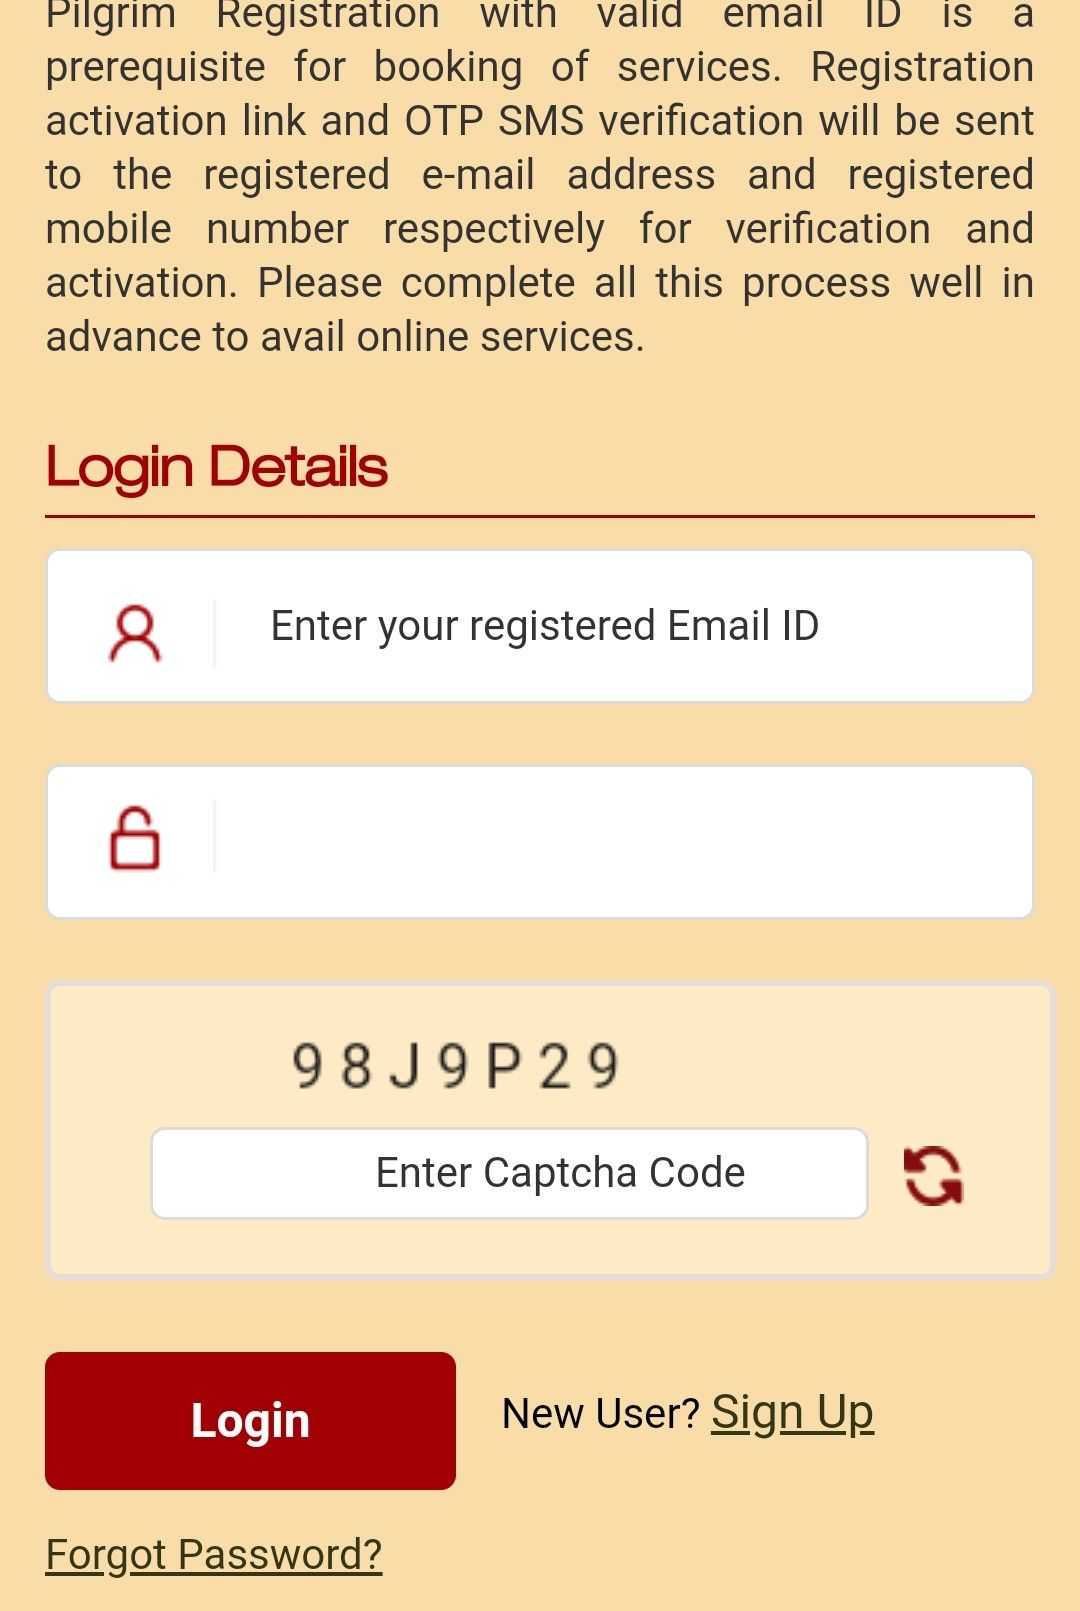 Login with your credentials and valid Captcha